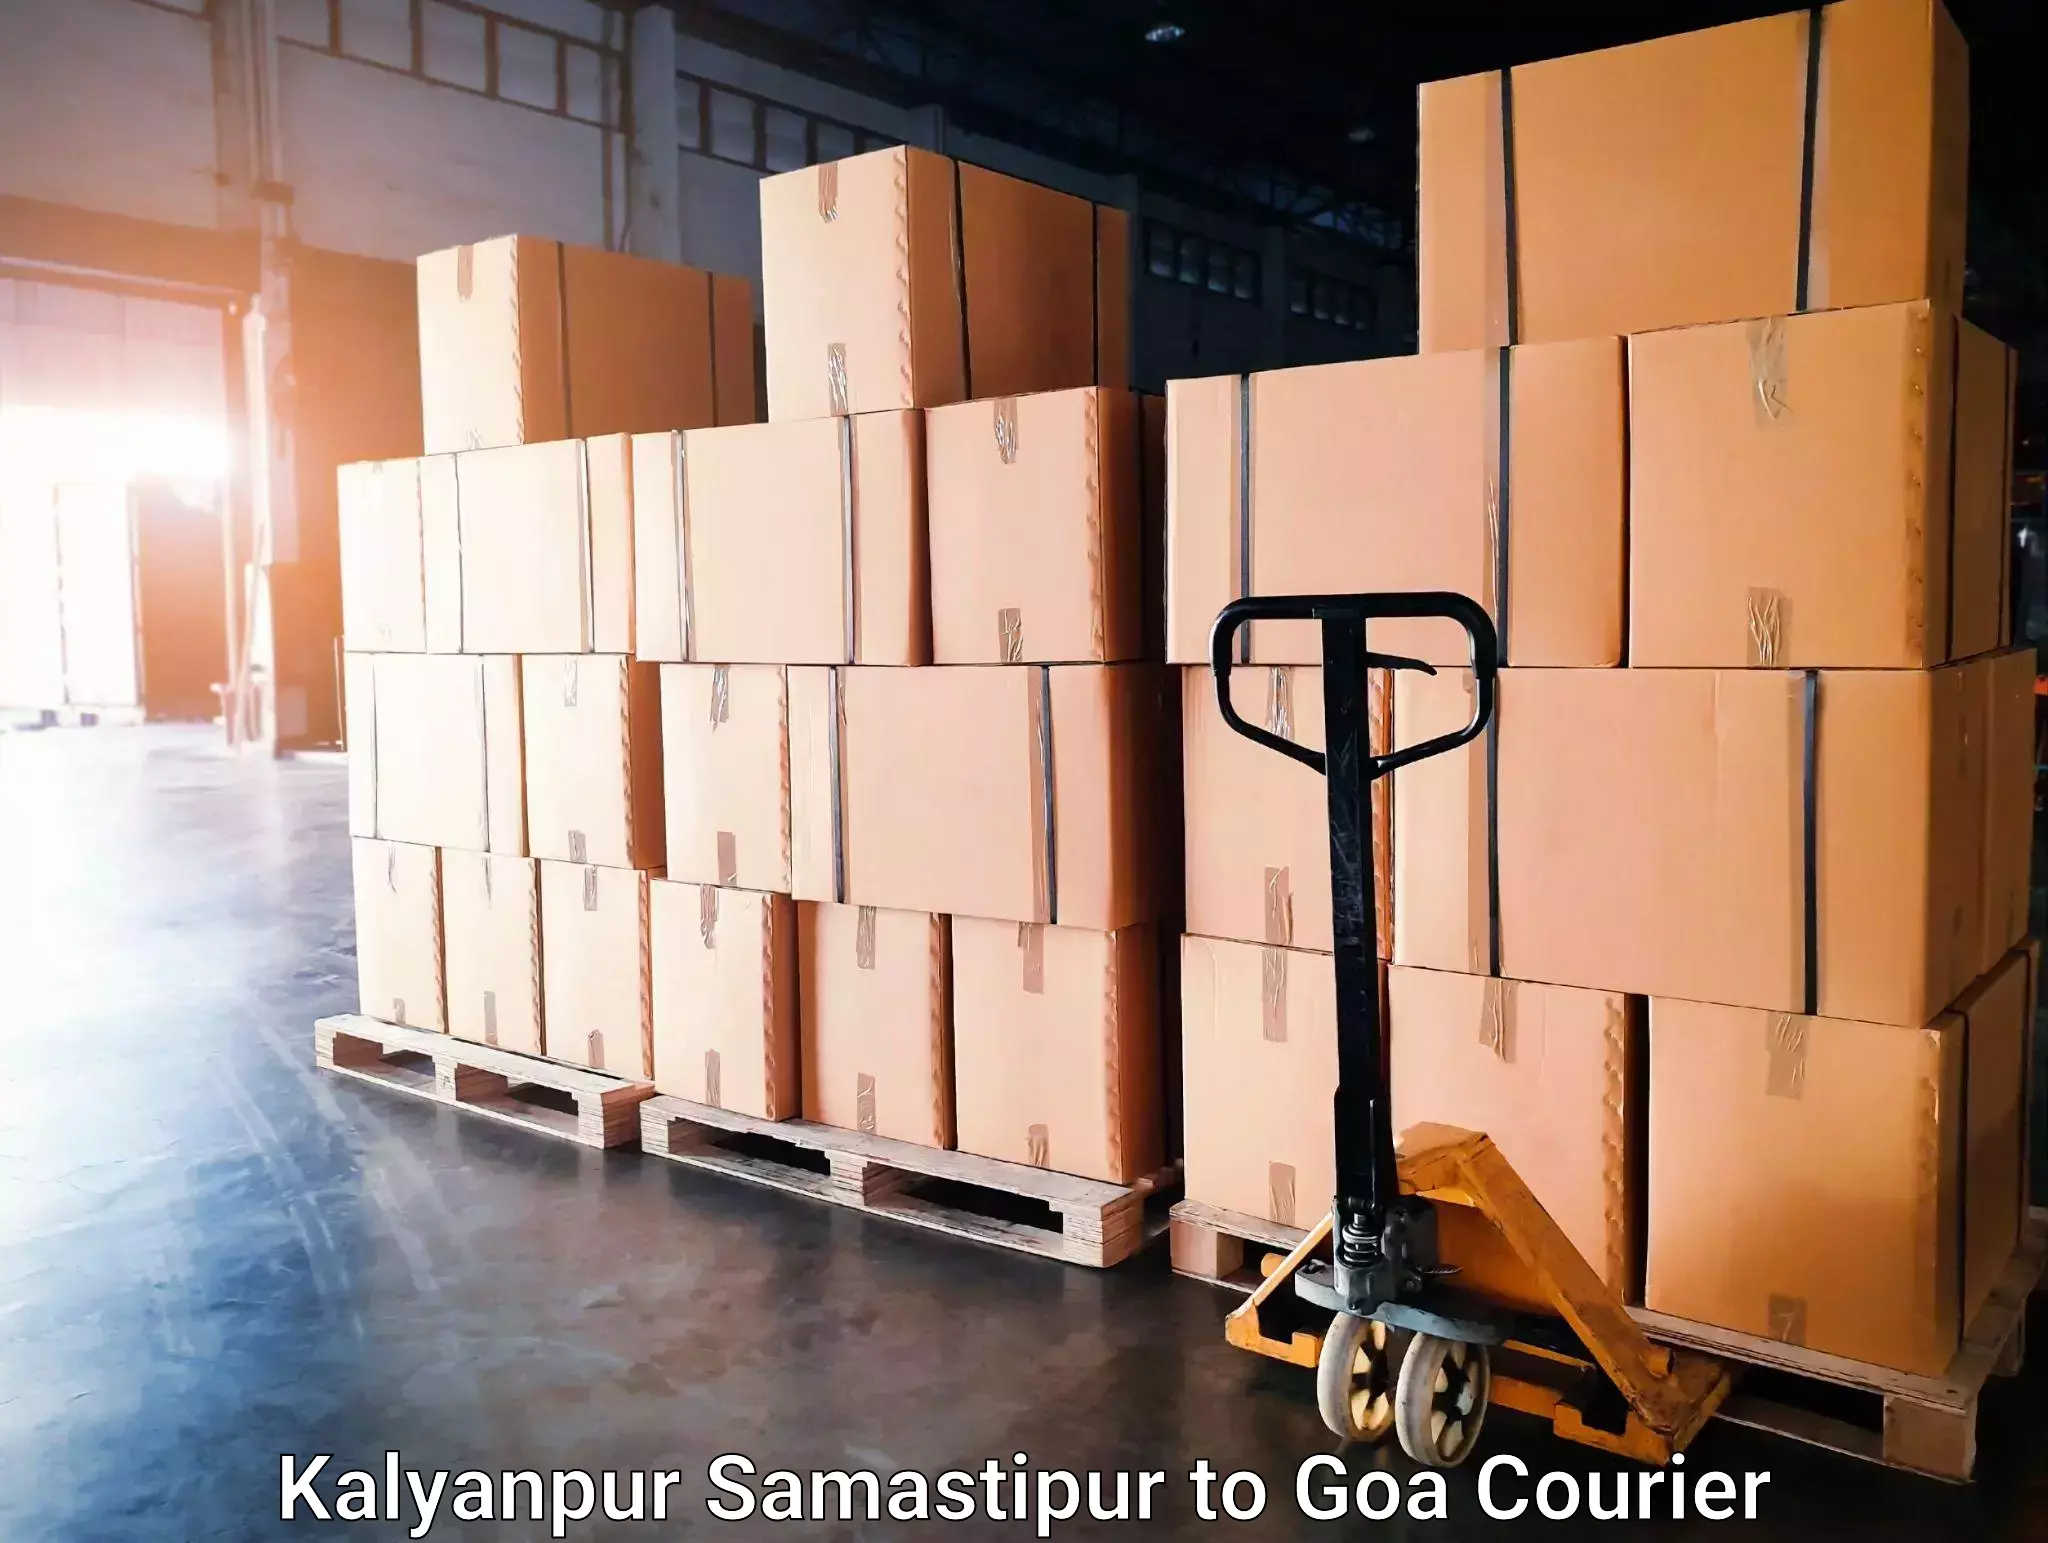 Furniture moving specialists Kalyanpur Samastipur to Goa